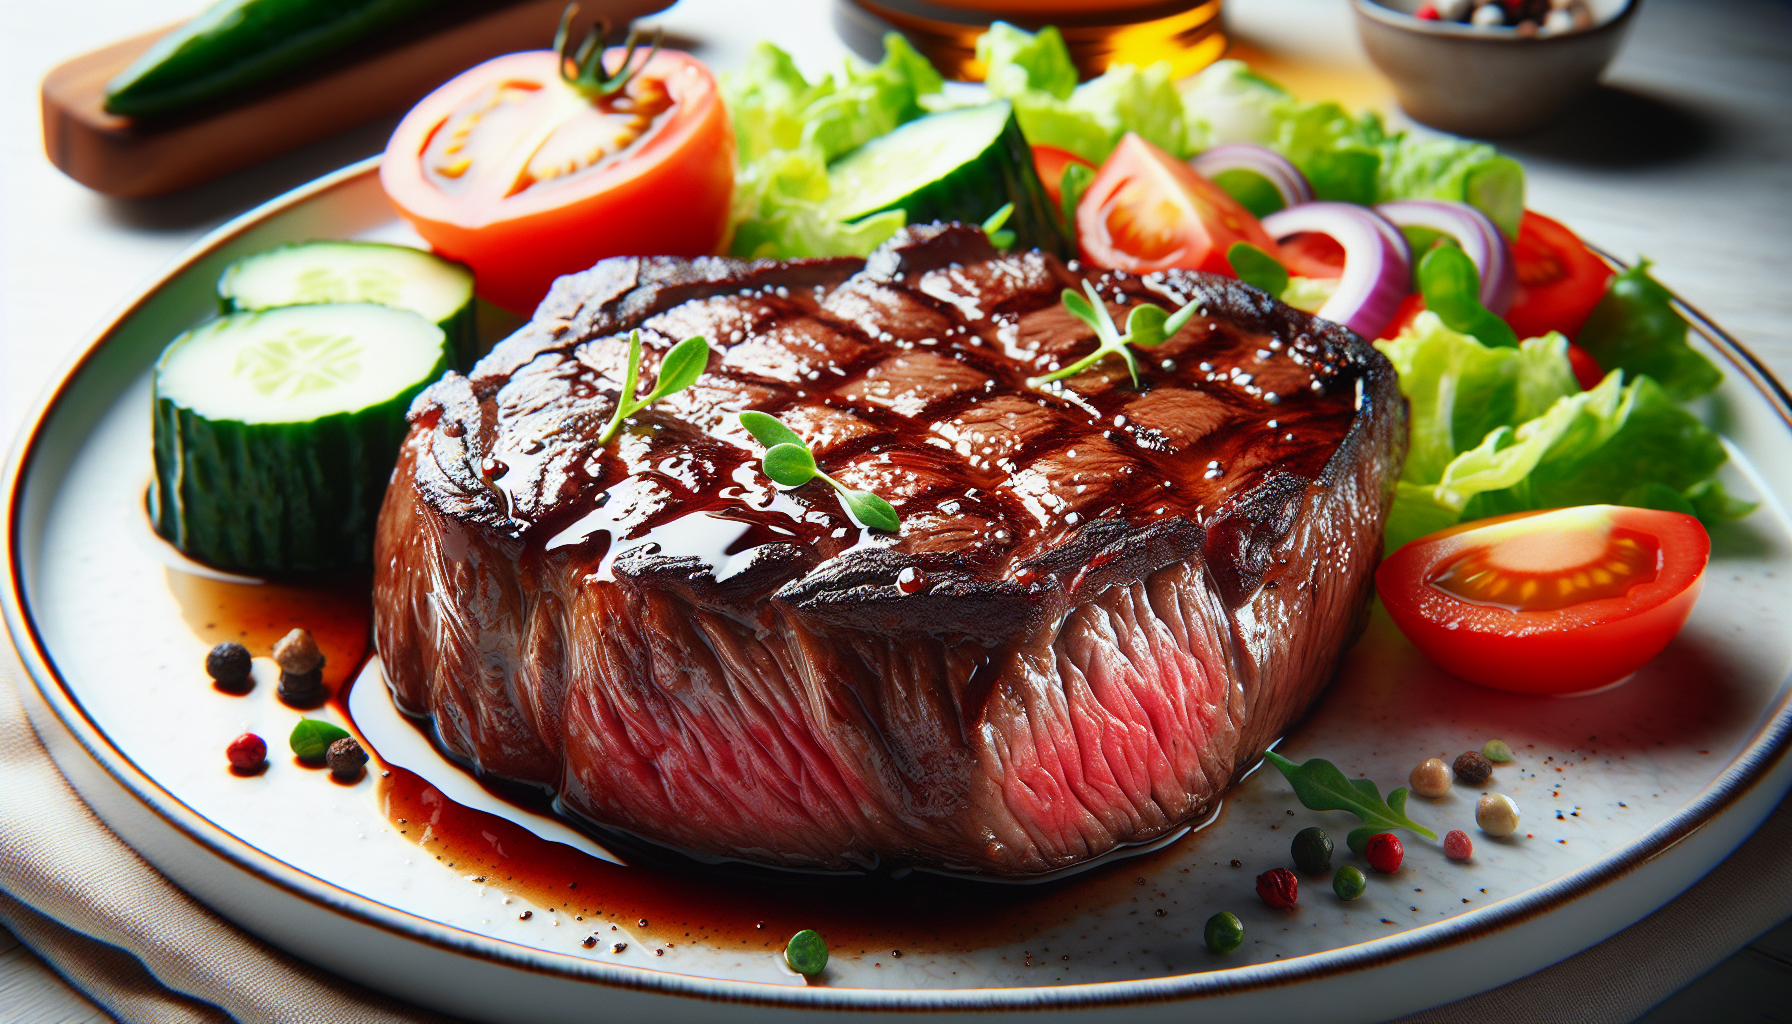 A plate with a juicy, char-broiled steak and a side of fresh salad